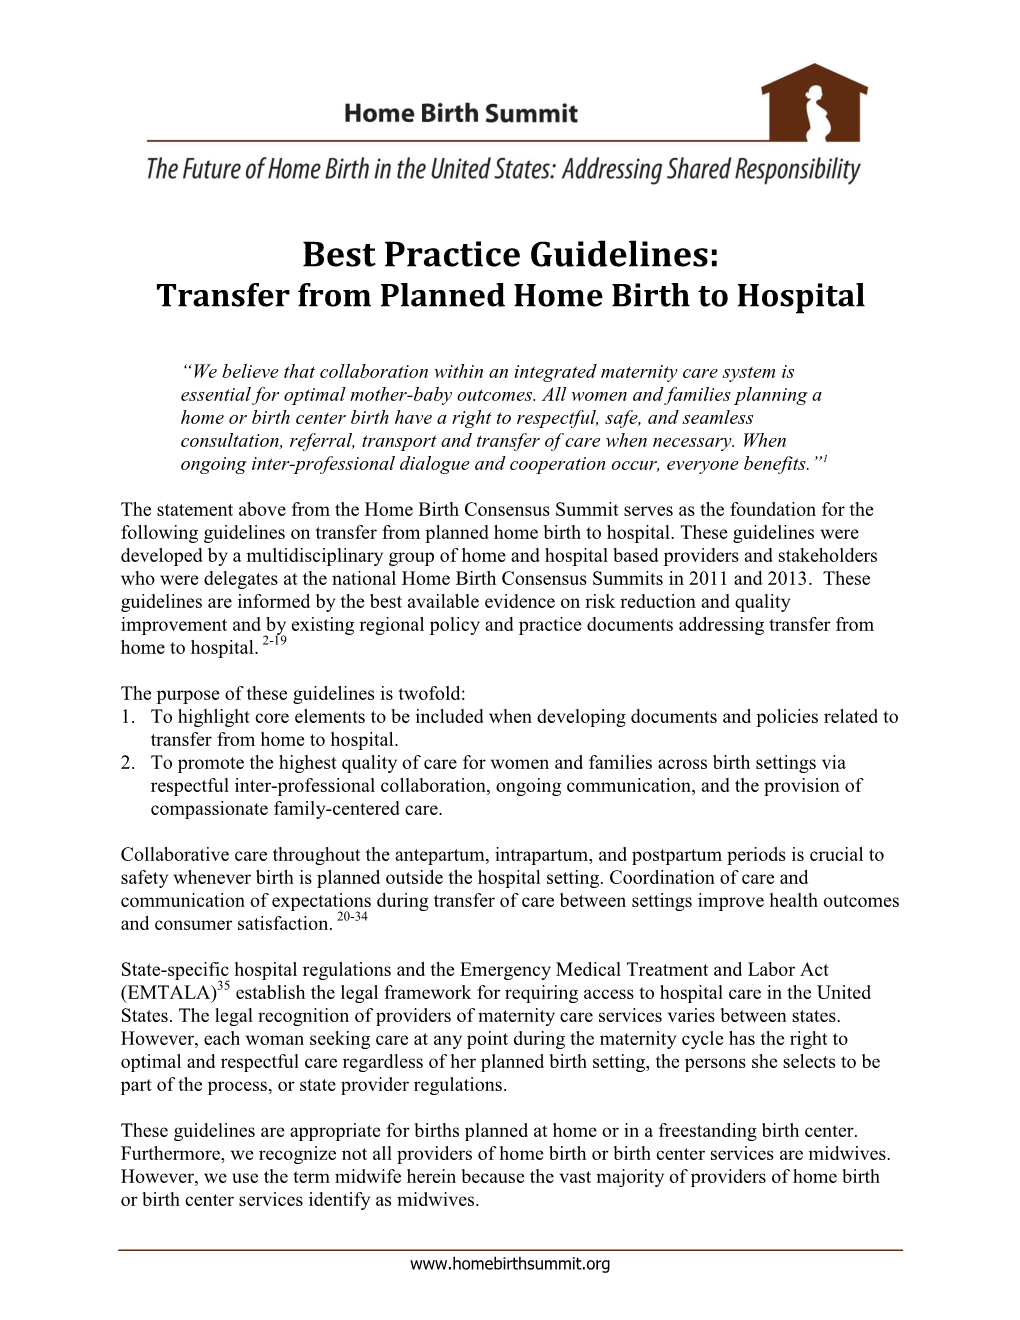 Best Practice Guidelines: Transfer from Planned Home Birth to Hospital